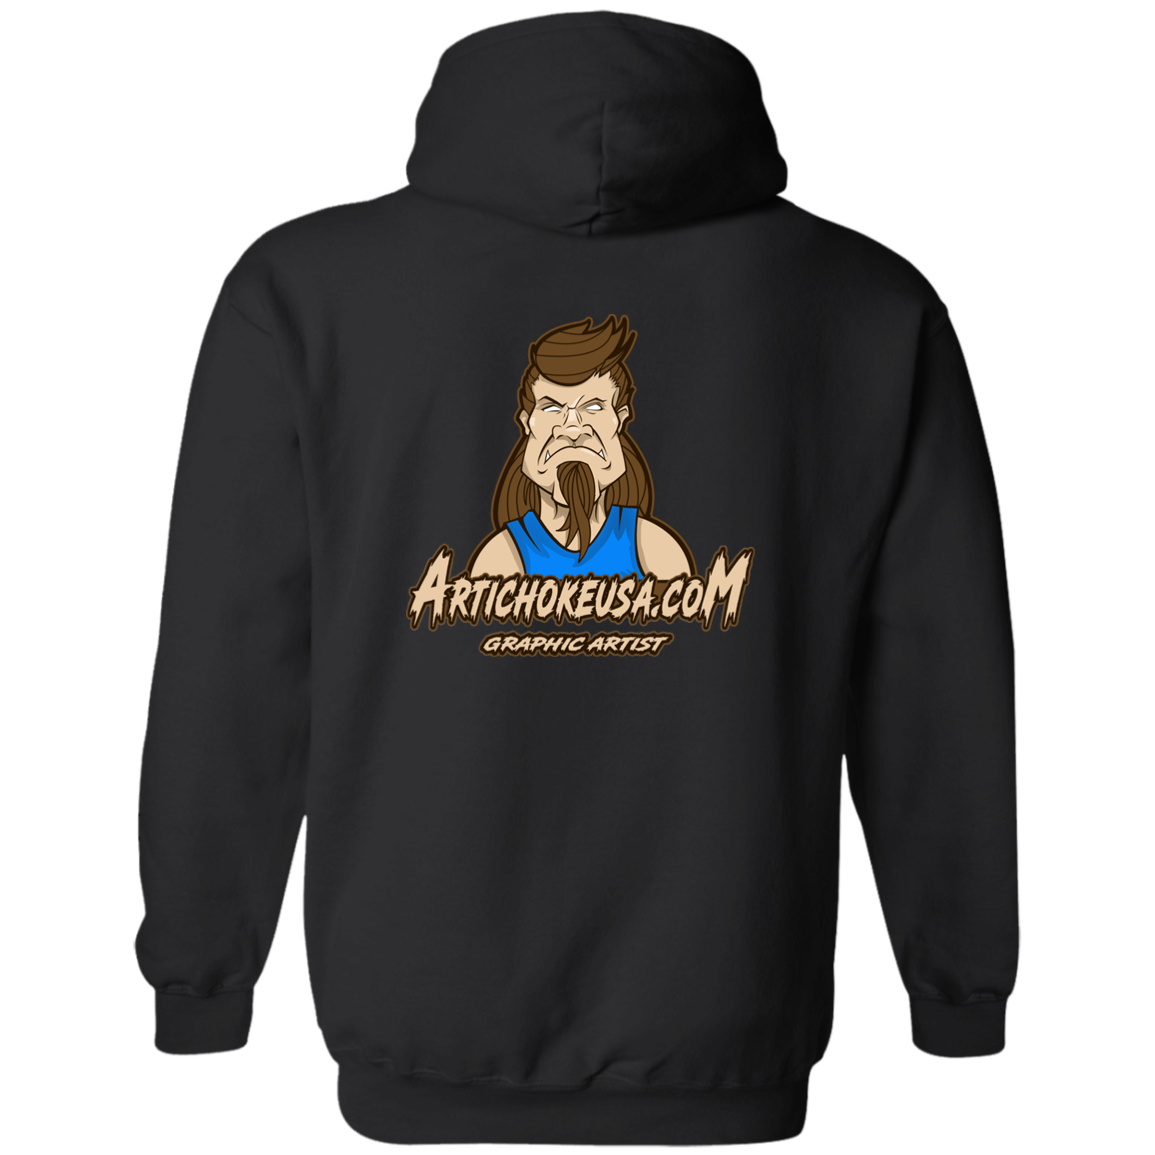 ArtichokeUSA Character and Font design. Let's Create Your Own Team Design Today. Mullet Mike. Zip Up Hooded Sweatshirt